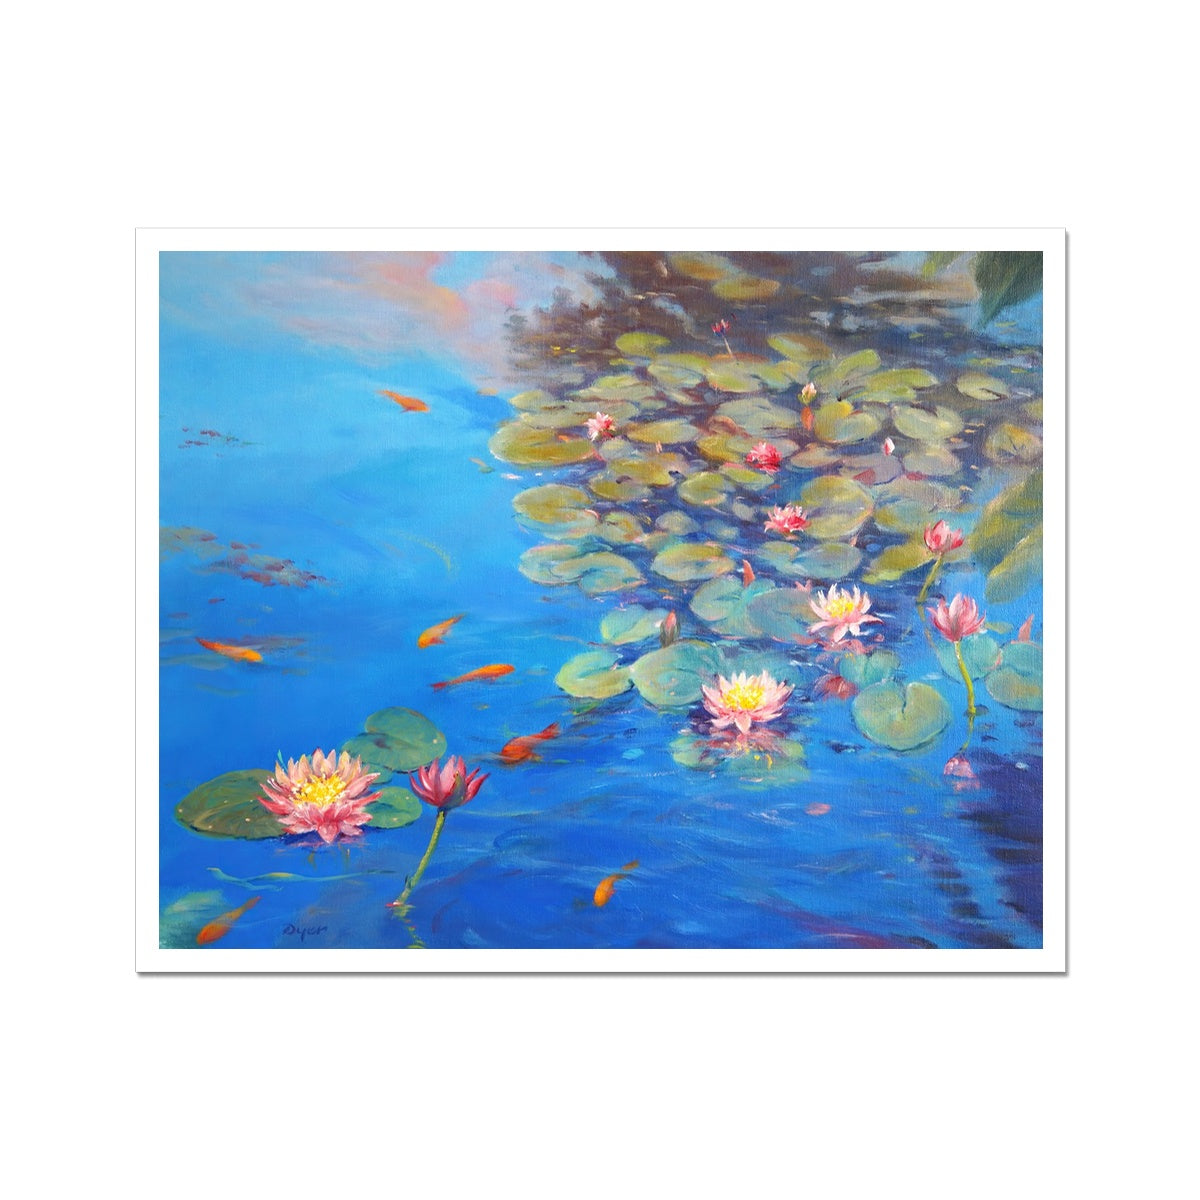 Ted Dyer Museum Quality Open Edition Cornish Art Print. 'Water lilies and Sky Reflections, Kimberley Park Pond, Falmouth'. Cornwall Art Gallery